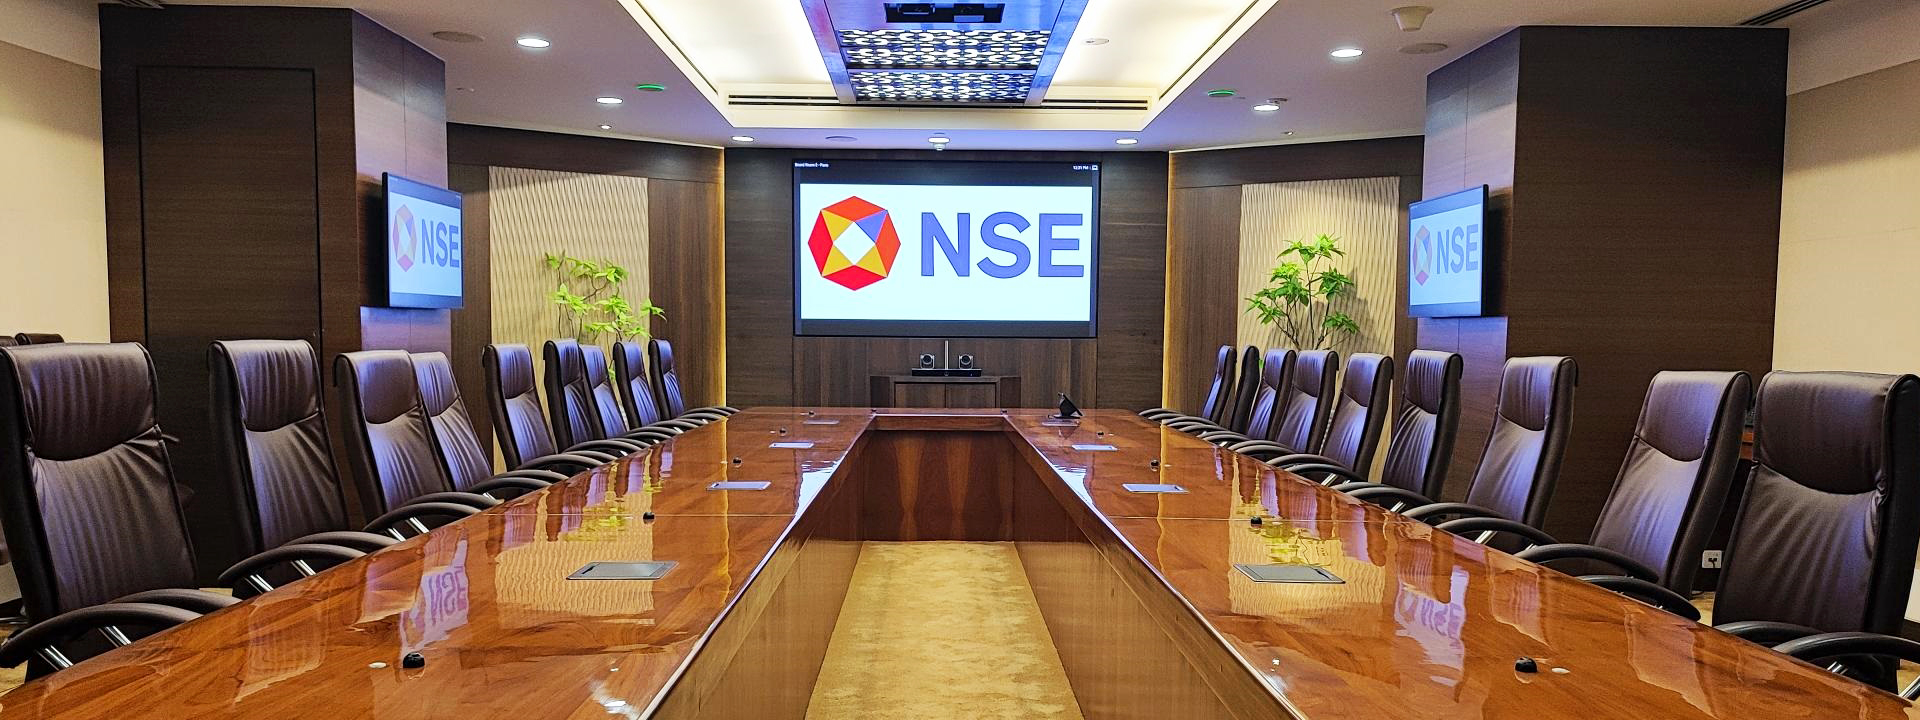 Boardroom Display for NSE